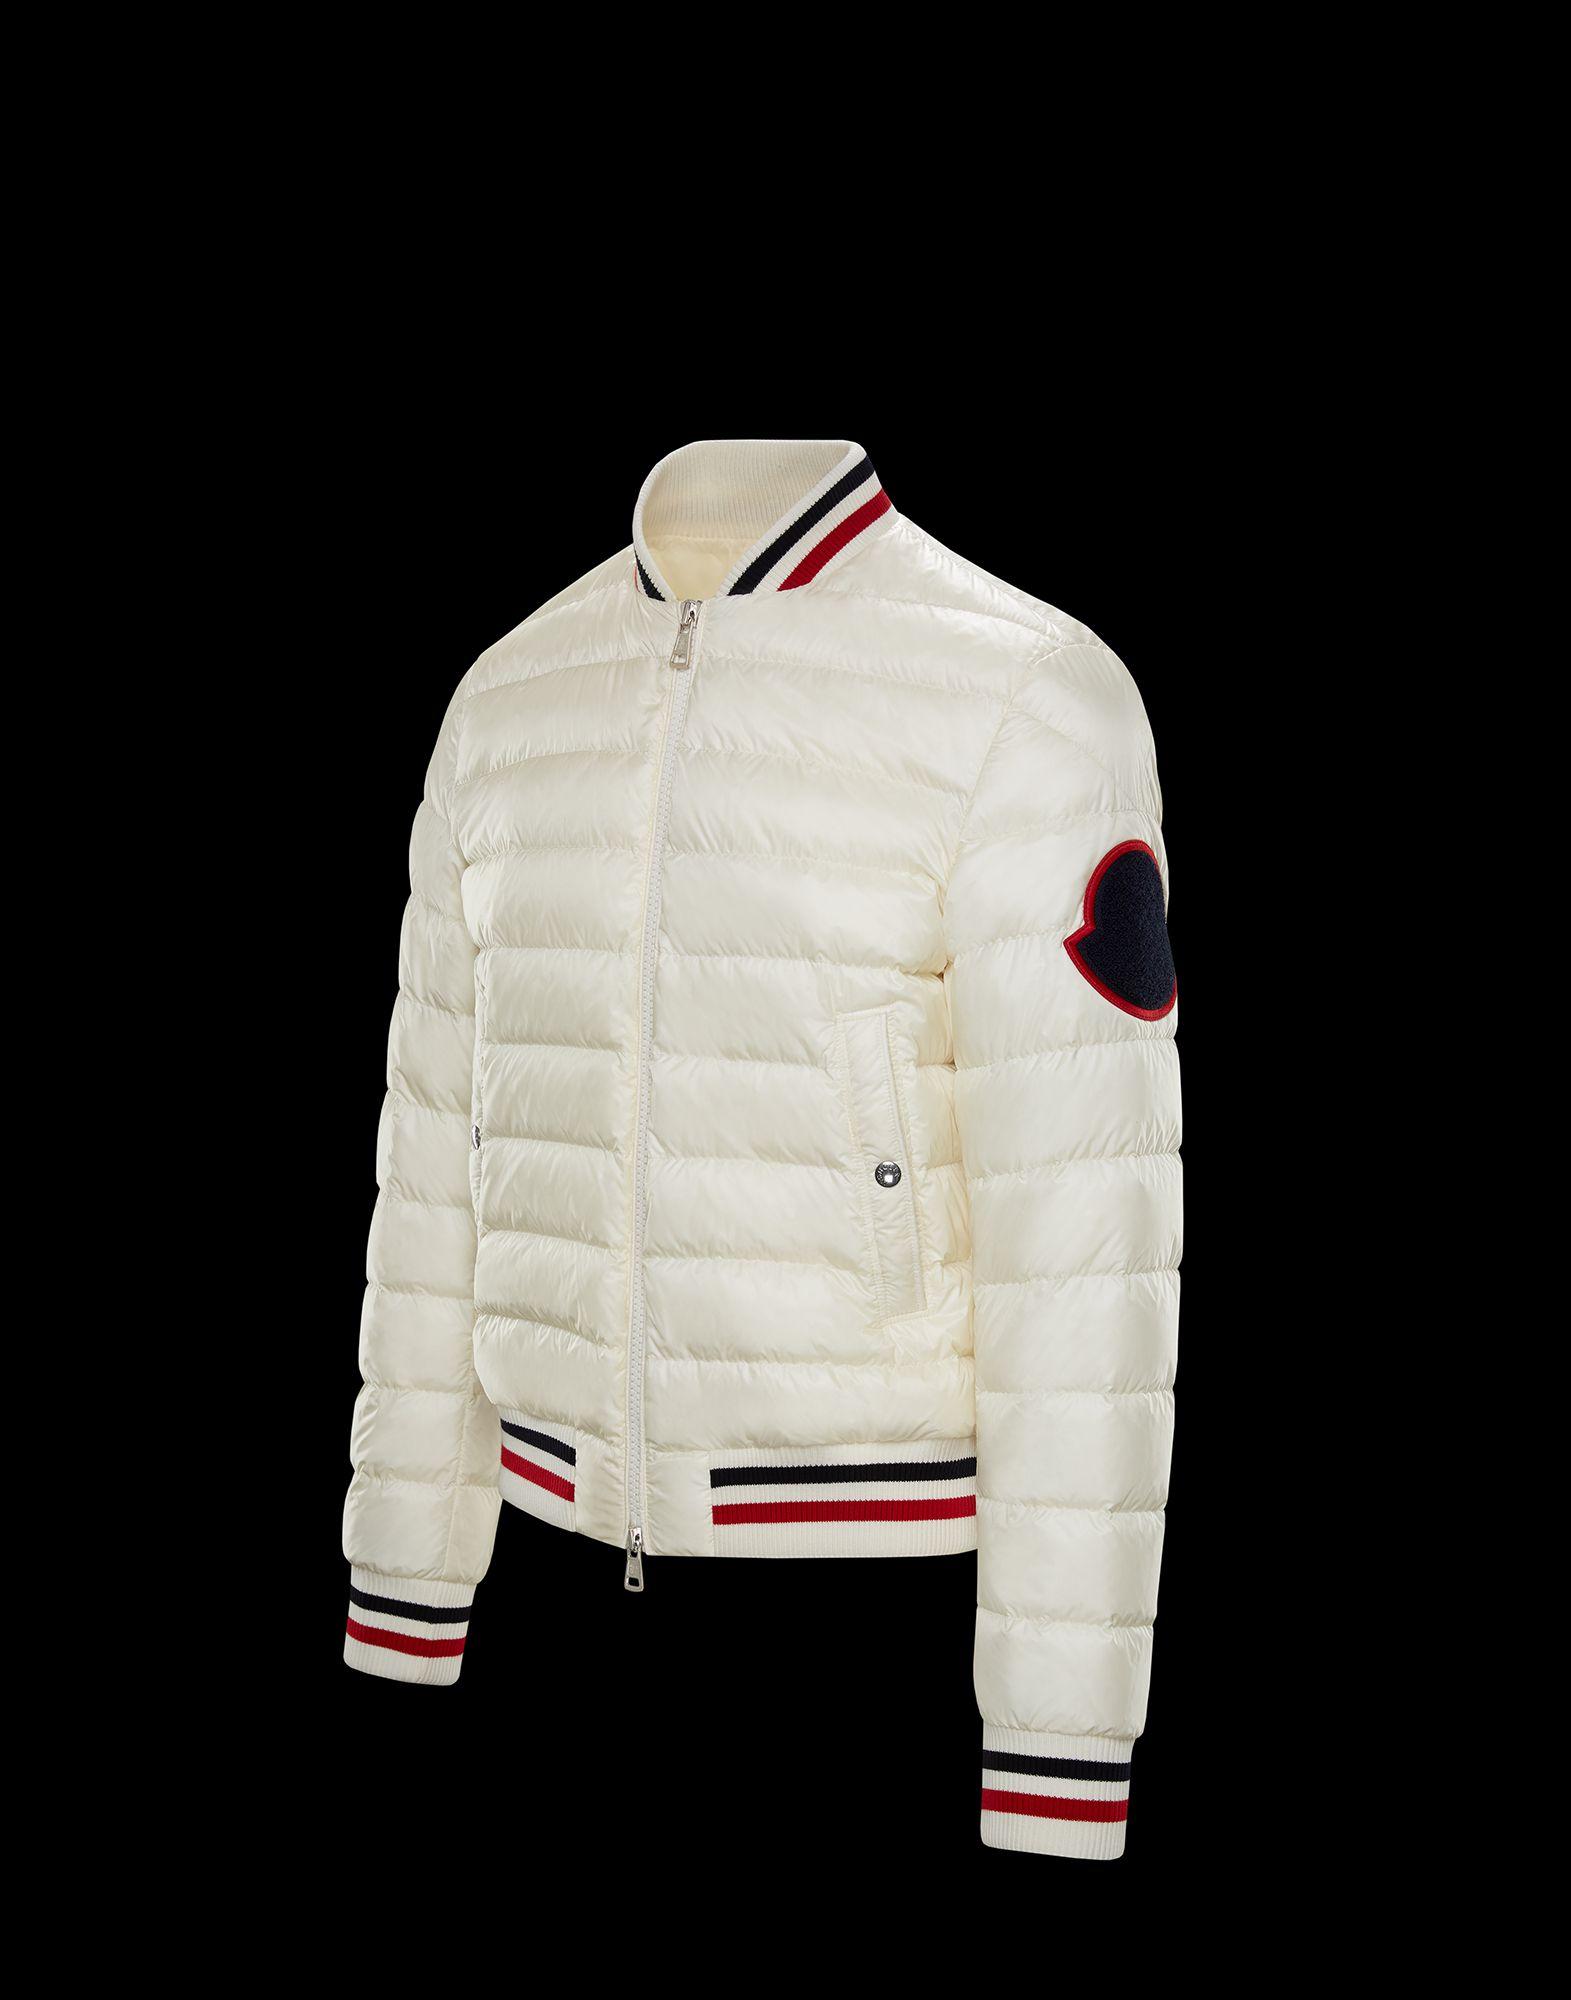 Moncler Synthetic 'deltour' Quilted Down Jacket in White for Men - Lyst